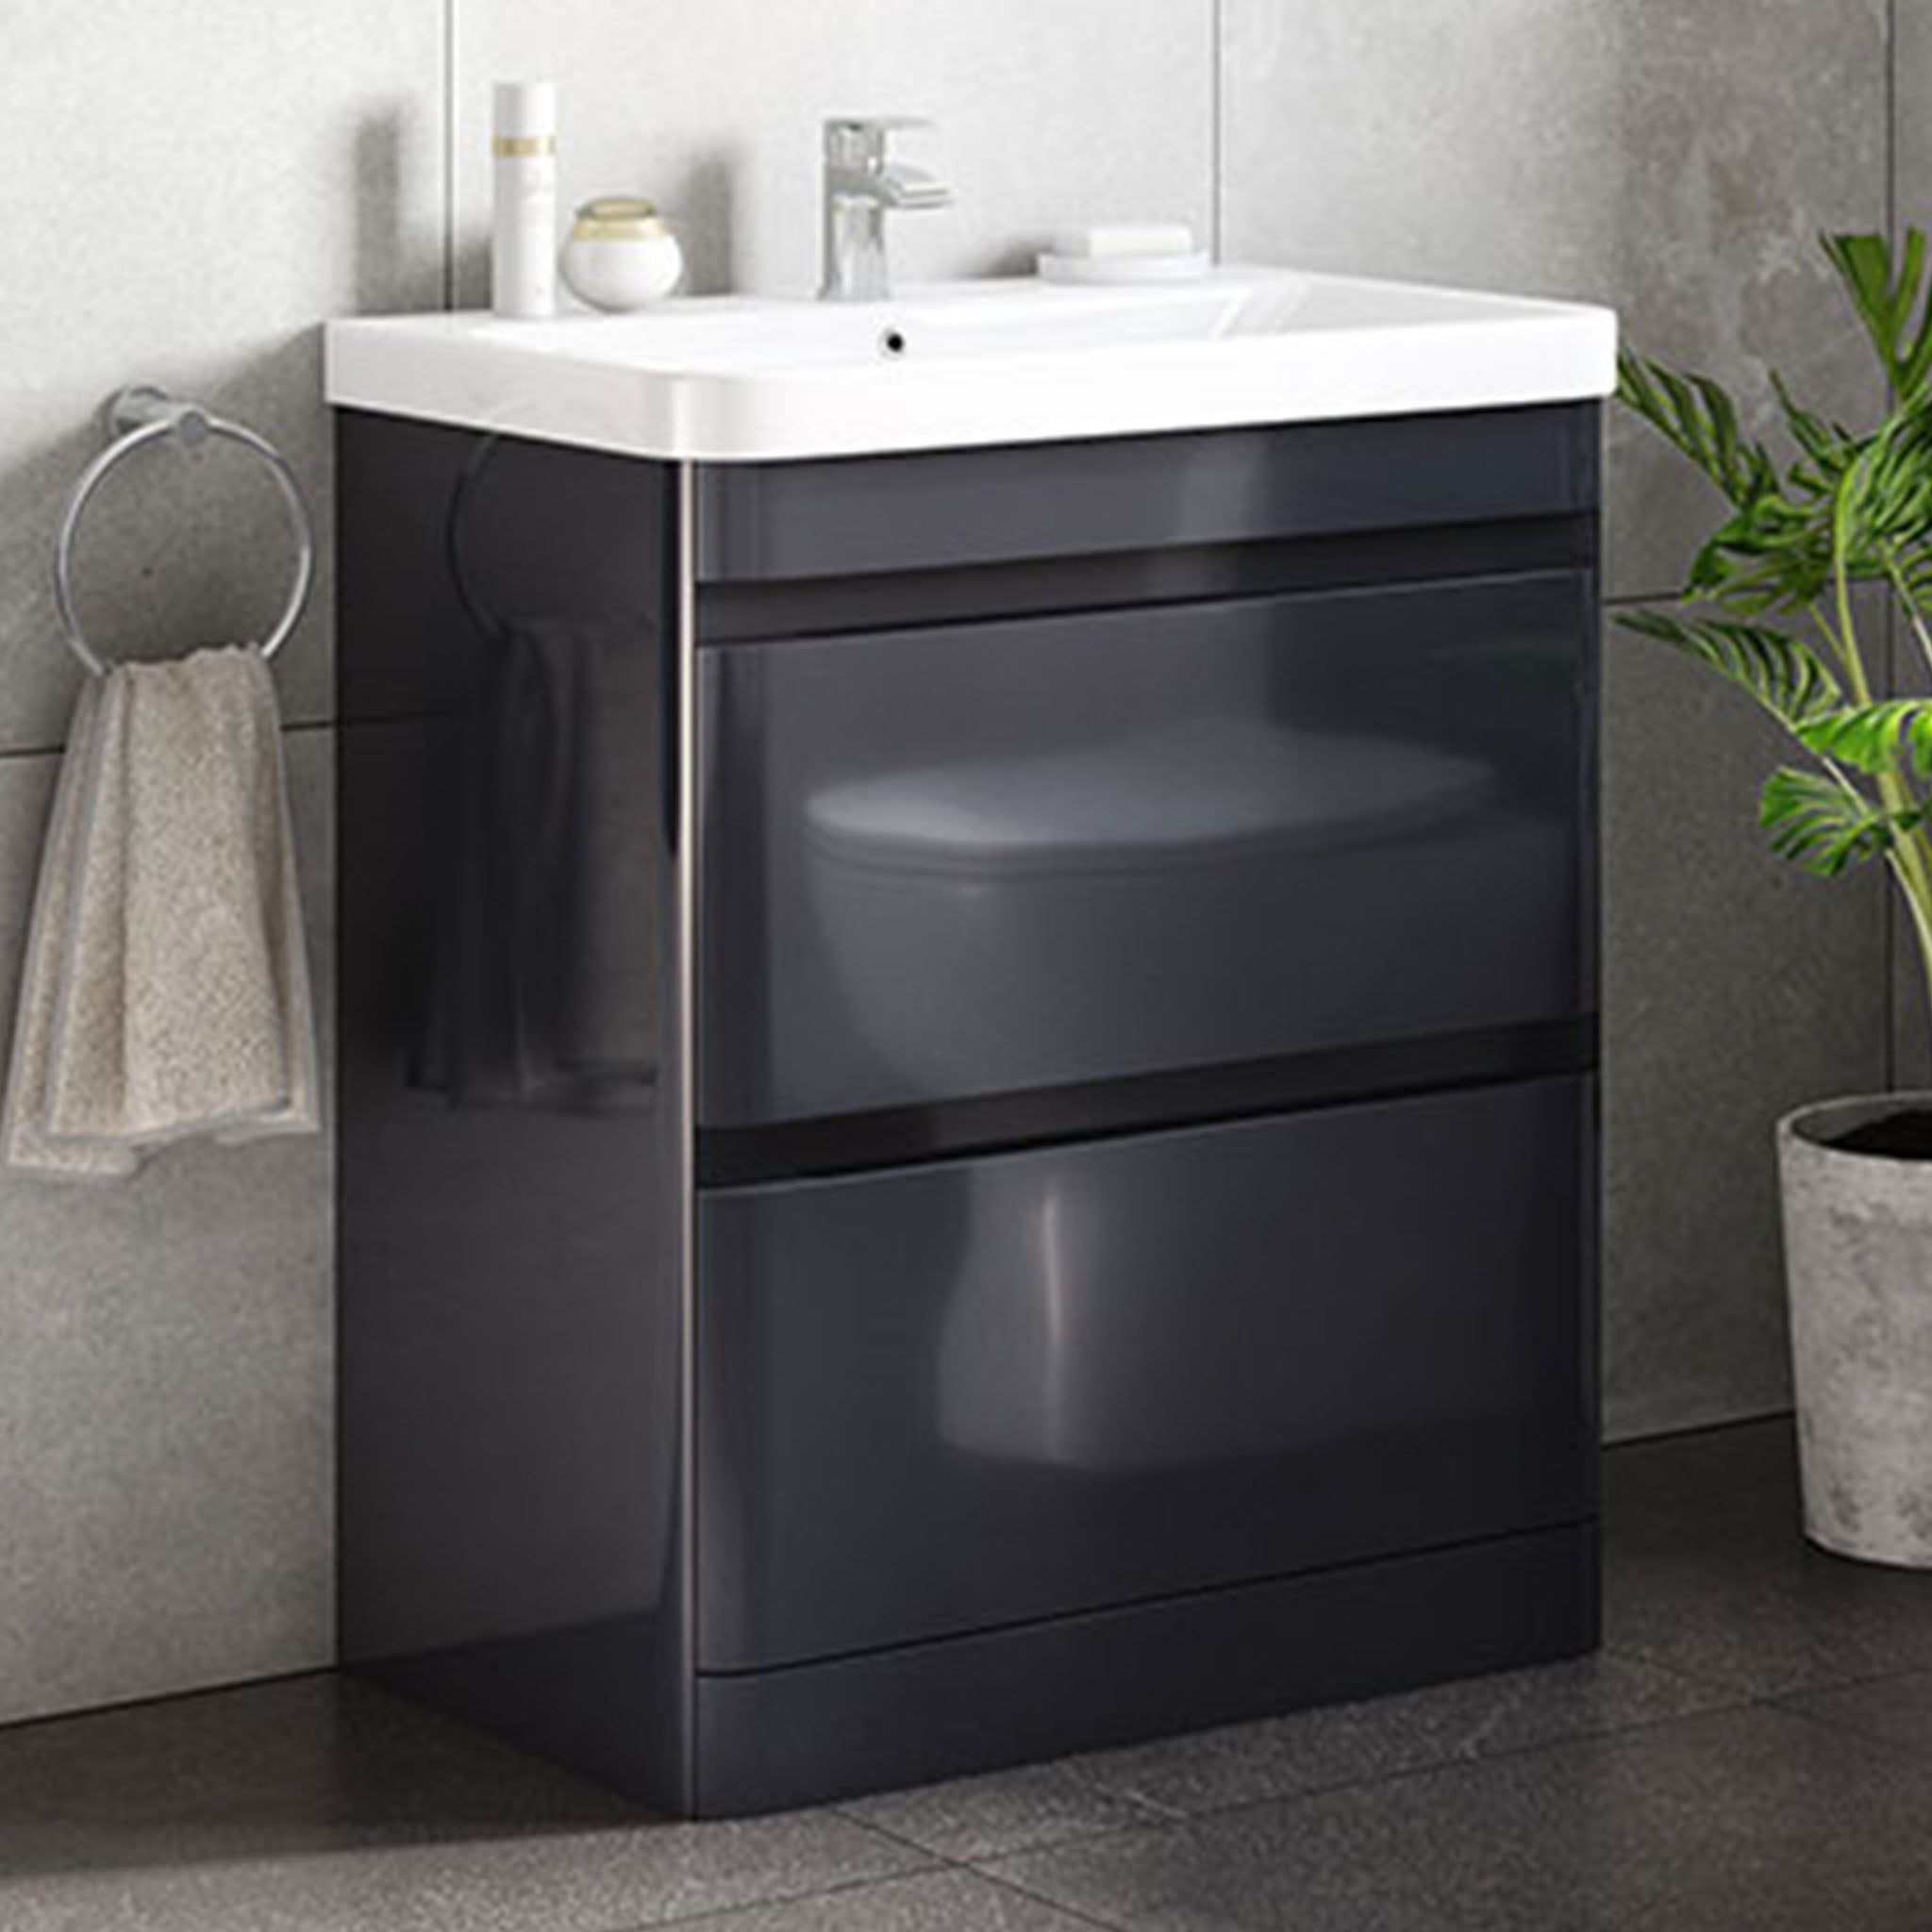 MyLife Clearance Casi 700mm 2 Drawer Floor Mounted Unit & Basin